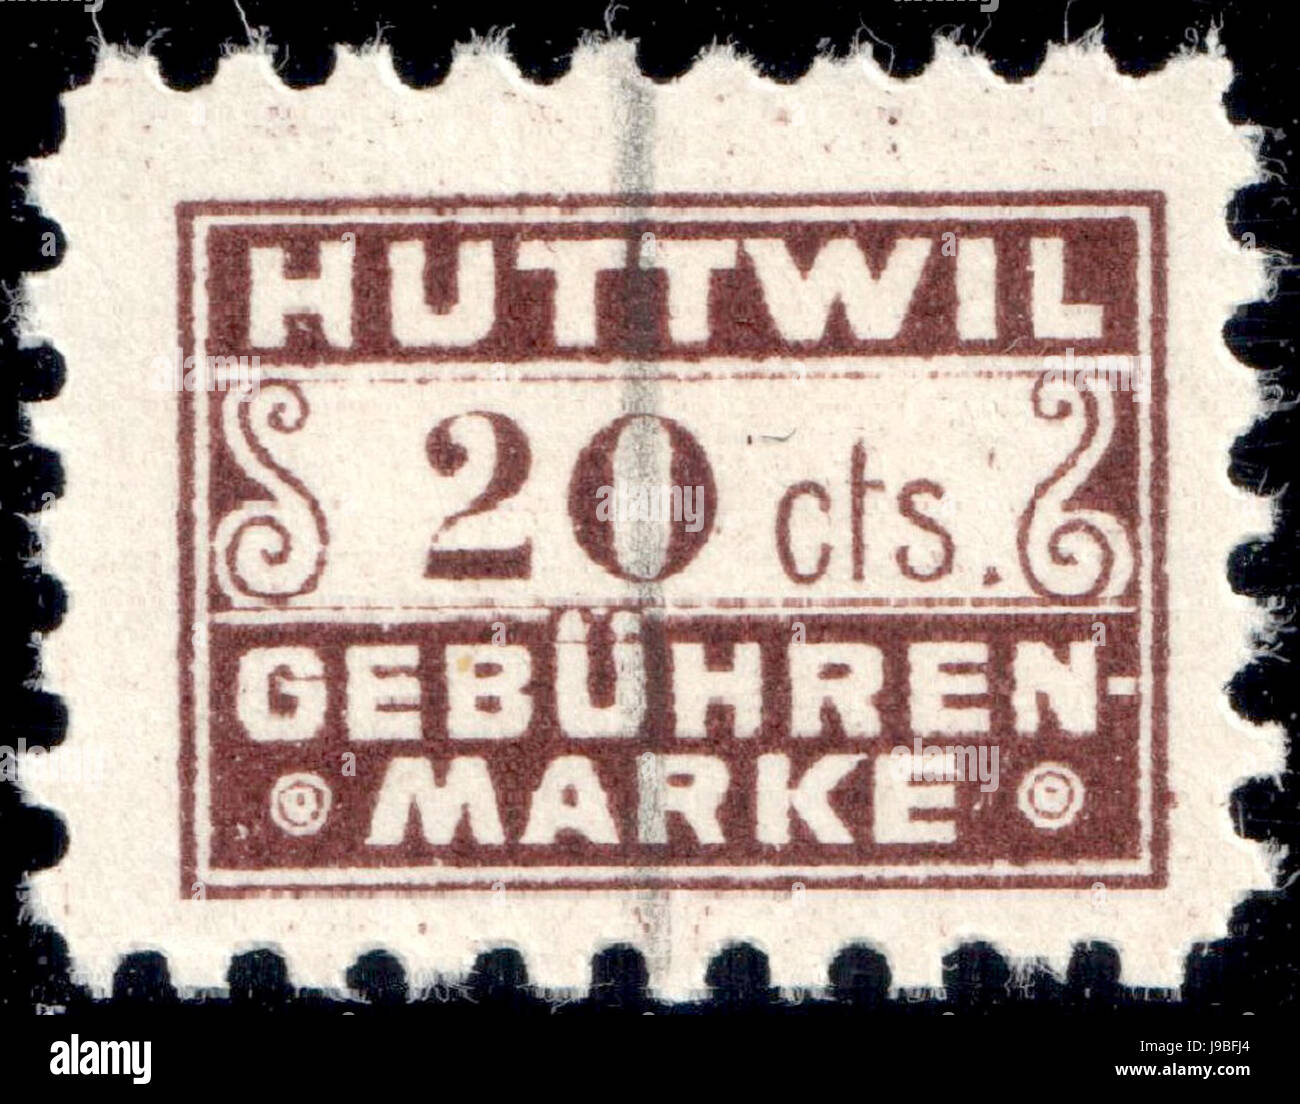 Huttwil High Resolution Stock Photography and Images - Alamy